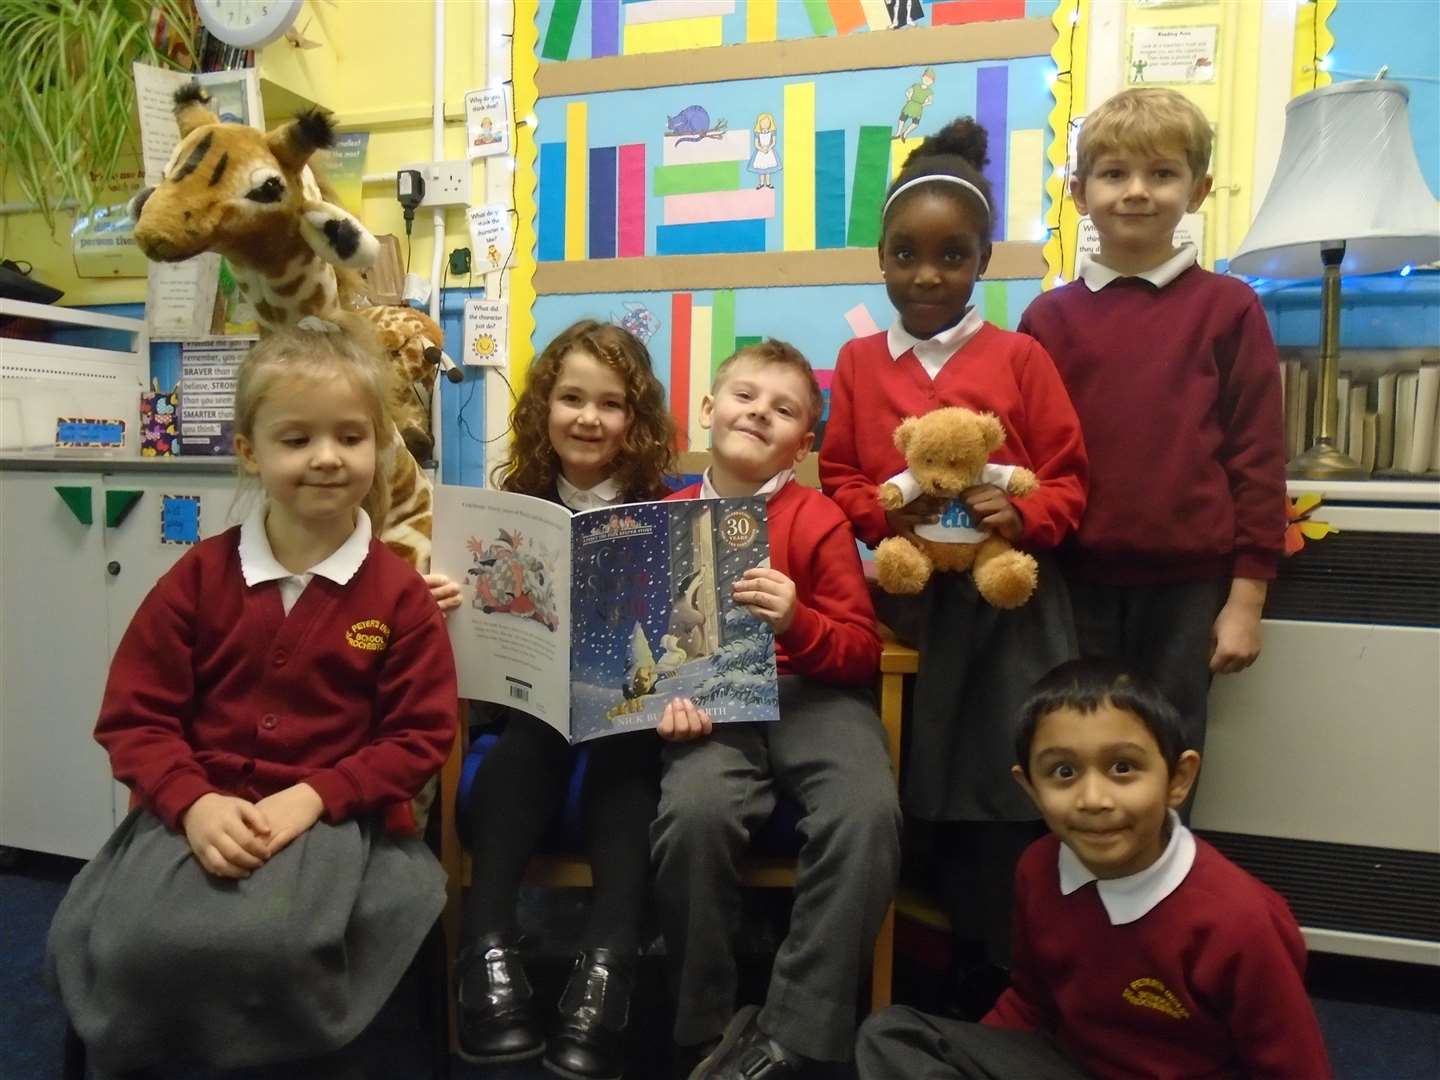 Children from Giraffe Class at St Peter's Infants, Rochester with their signed copy of One Snowy Night.